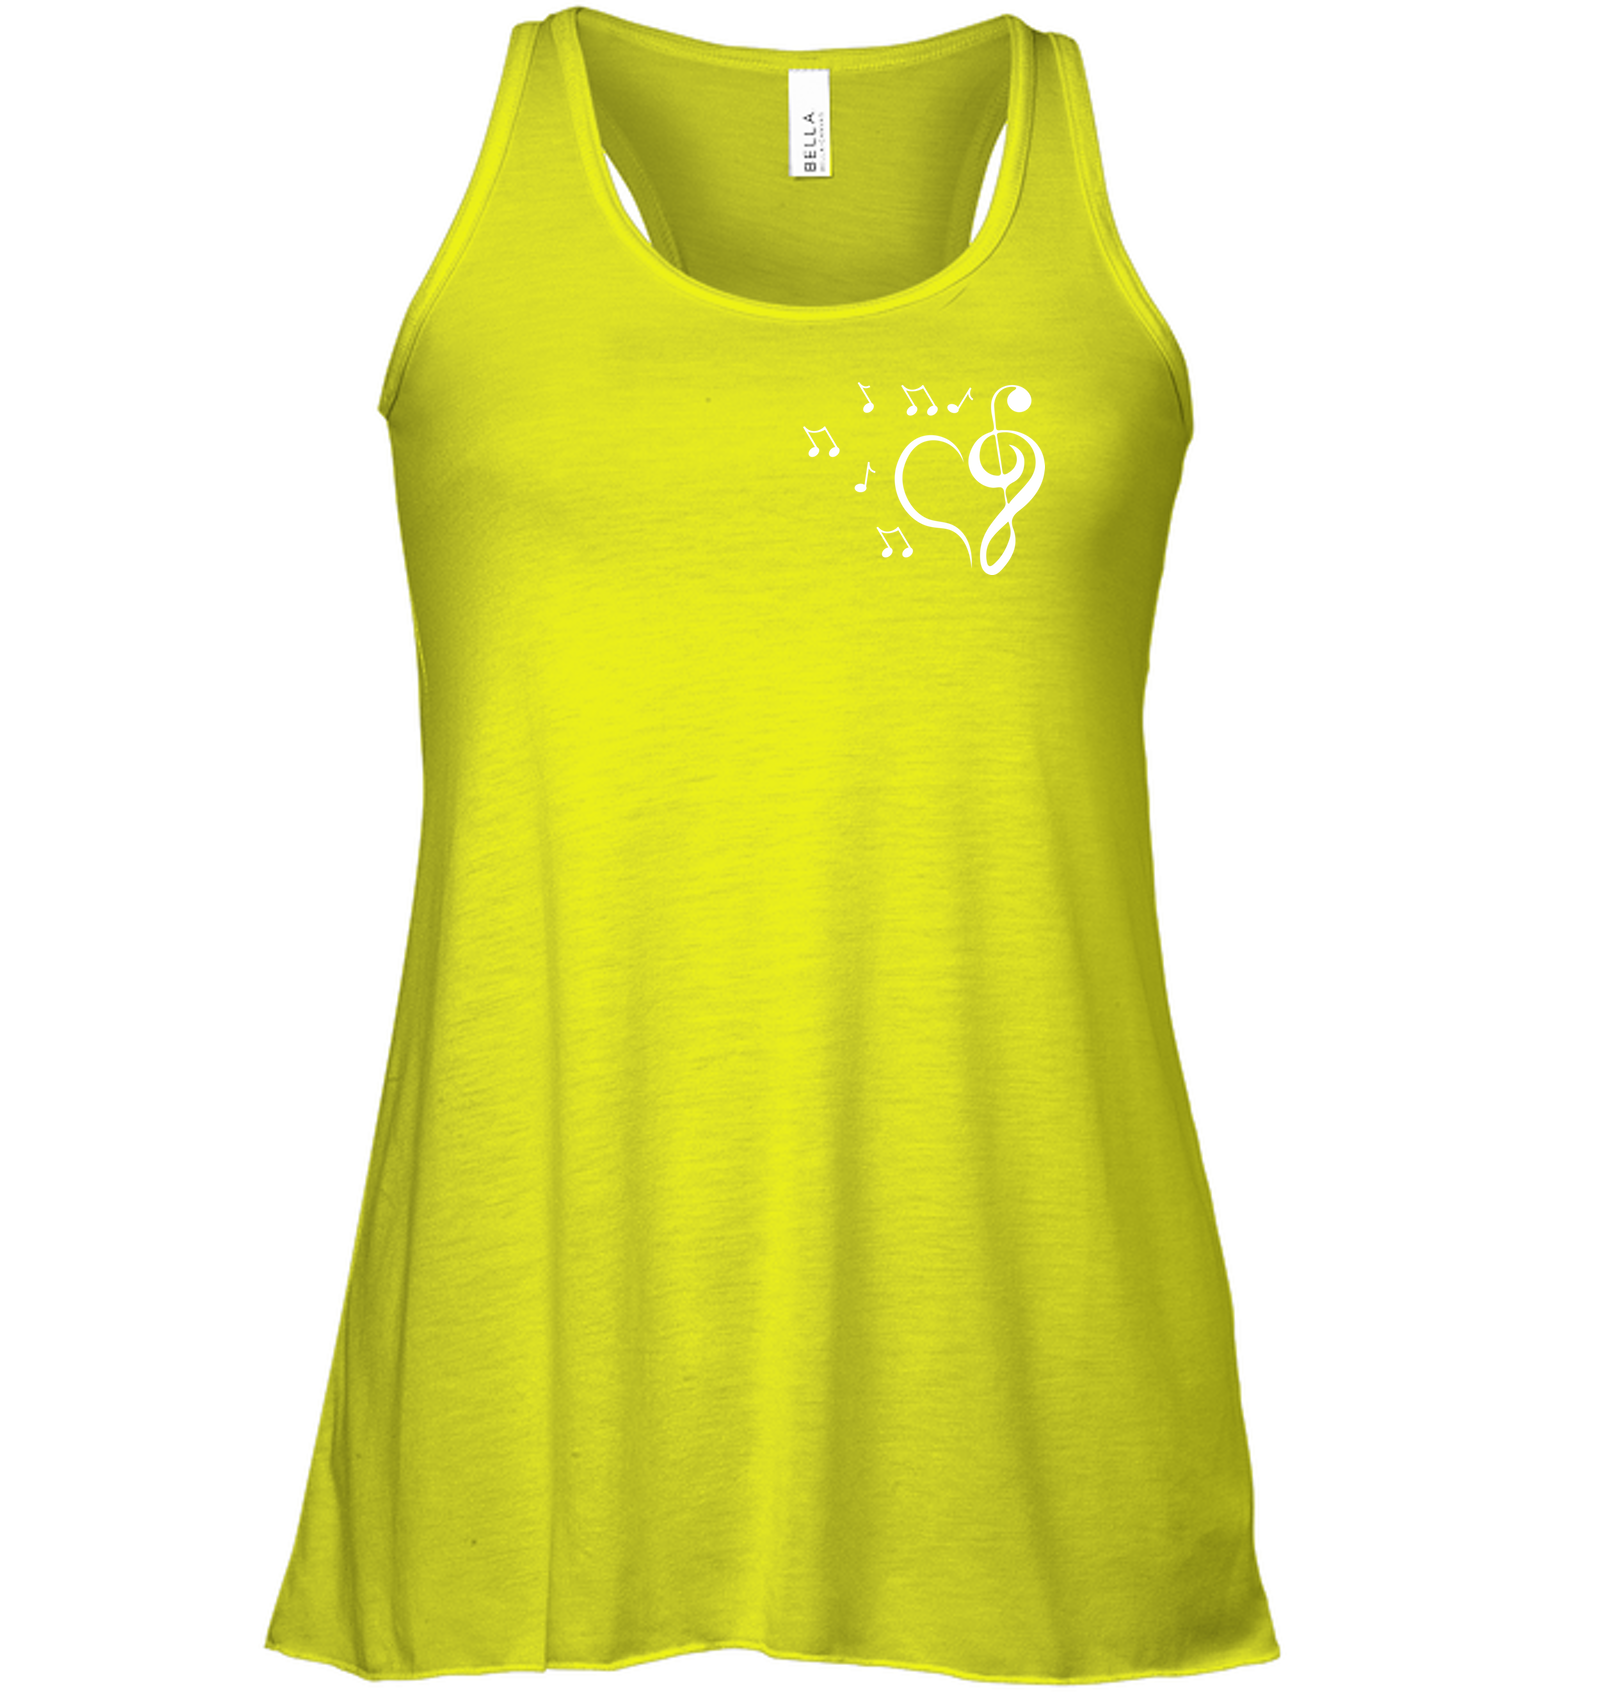 Musical heart with floating notes (Pocket Size) - Bella + Canvas Women's Flowy Racerback Tank